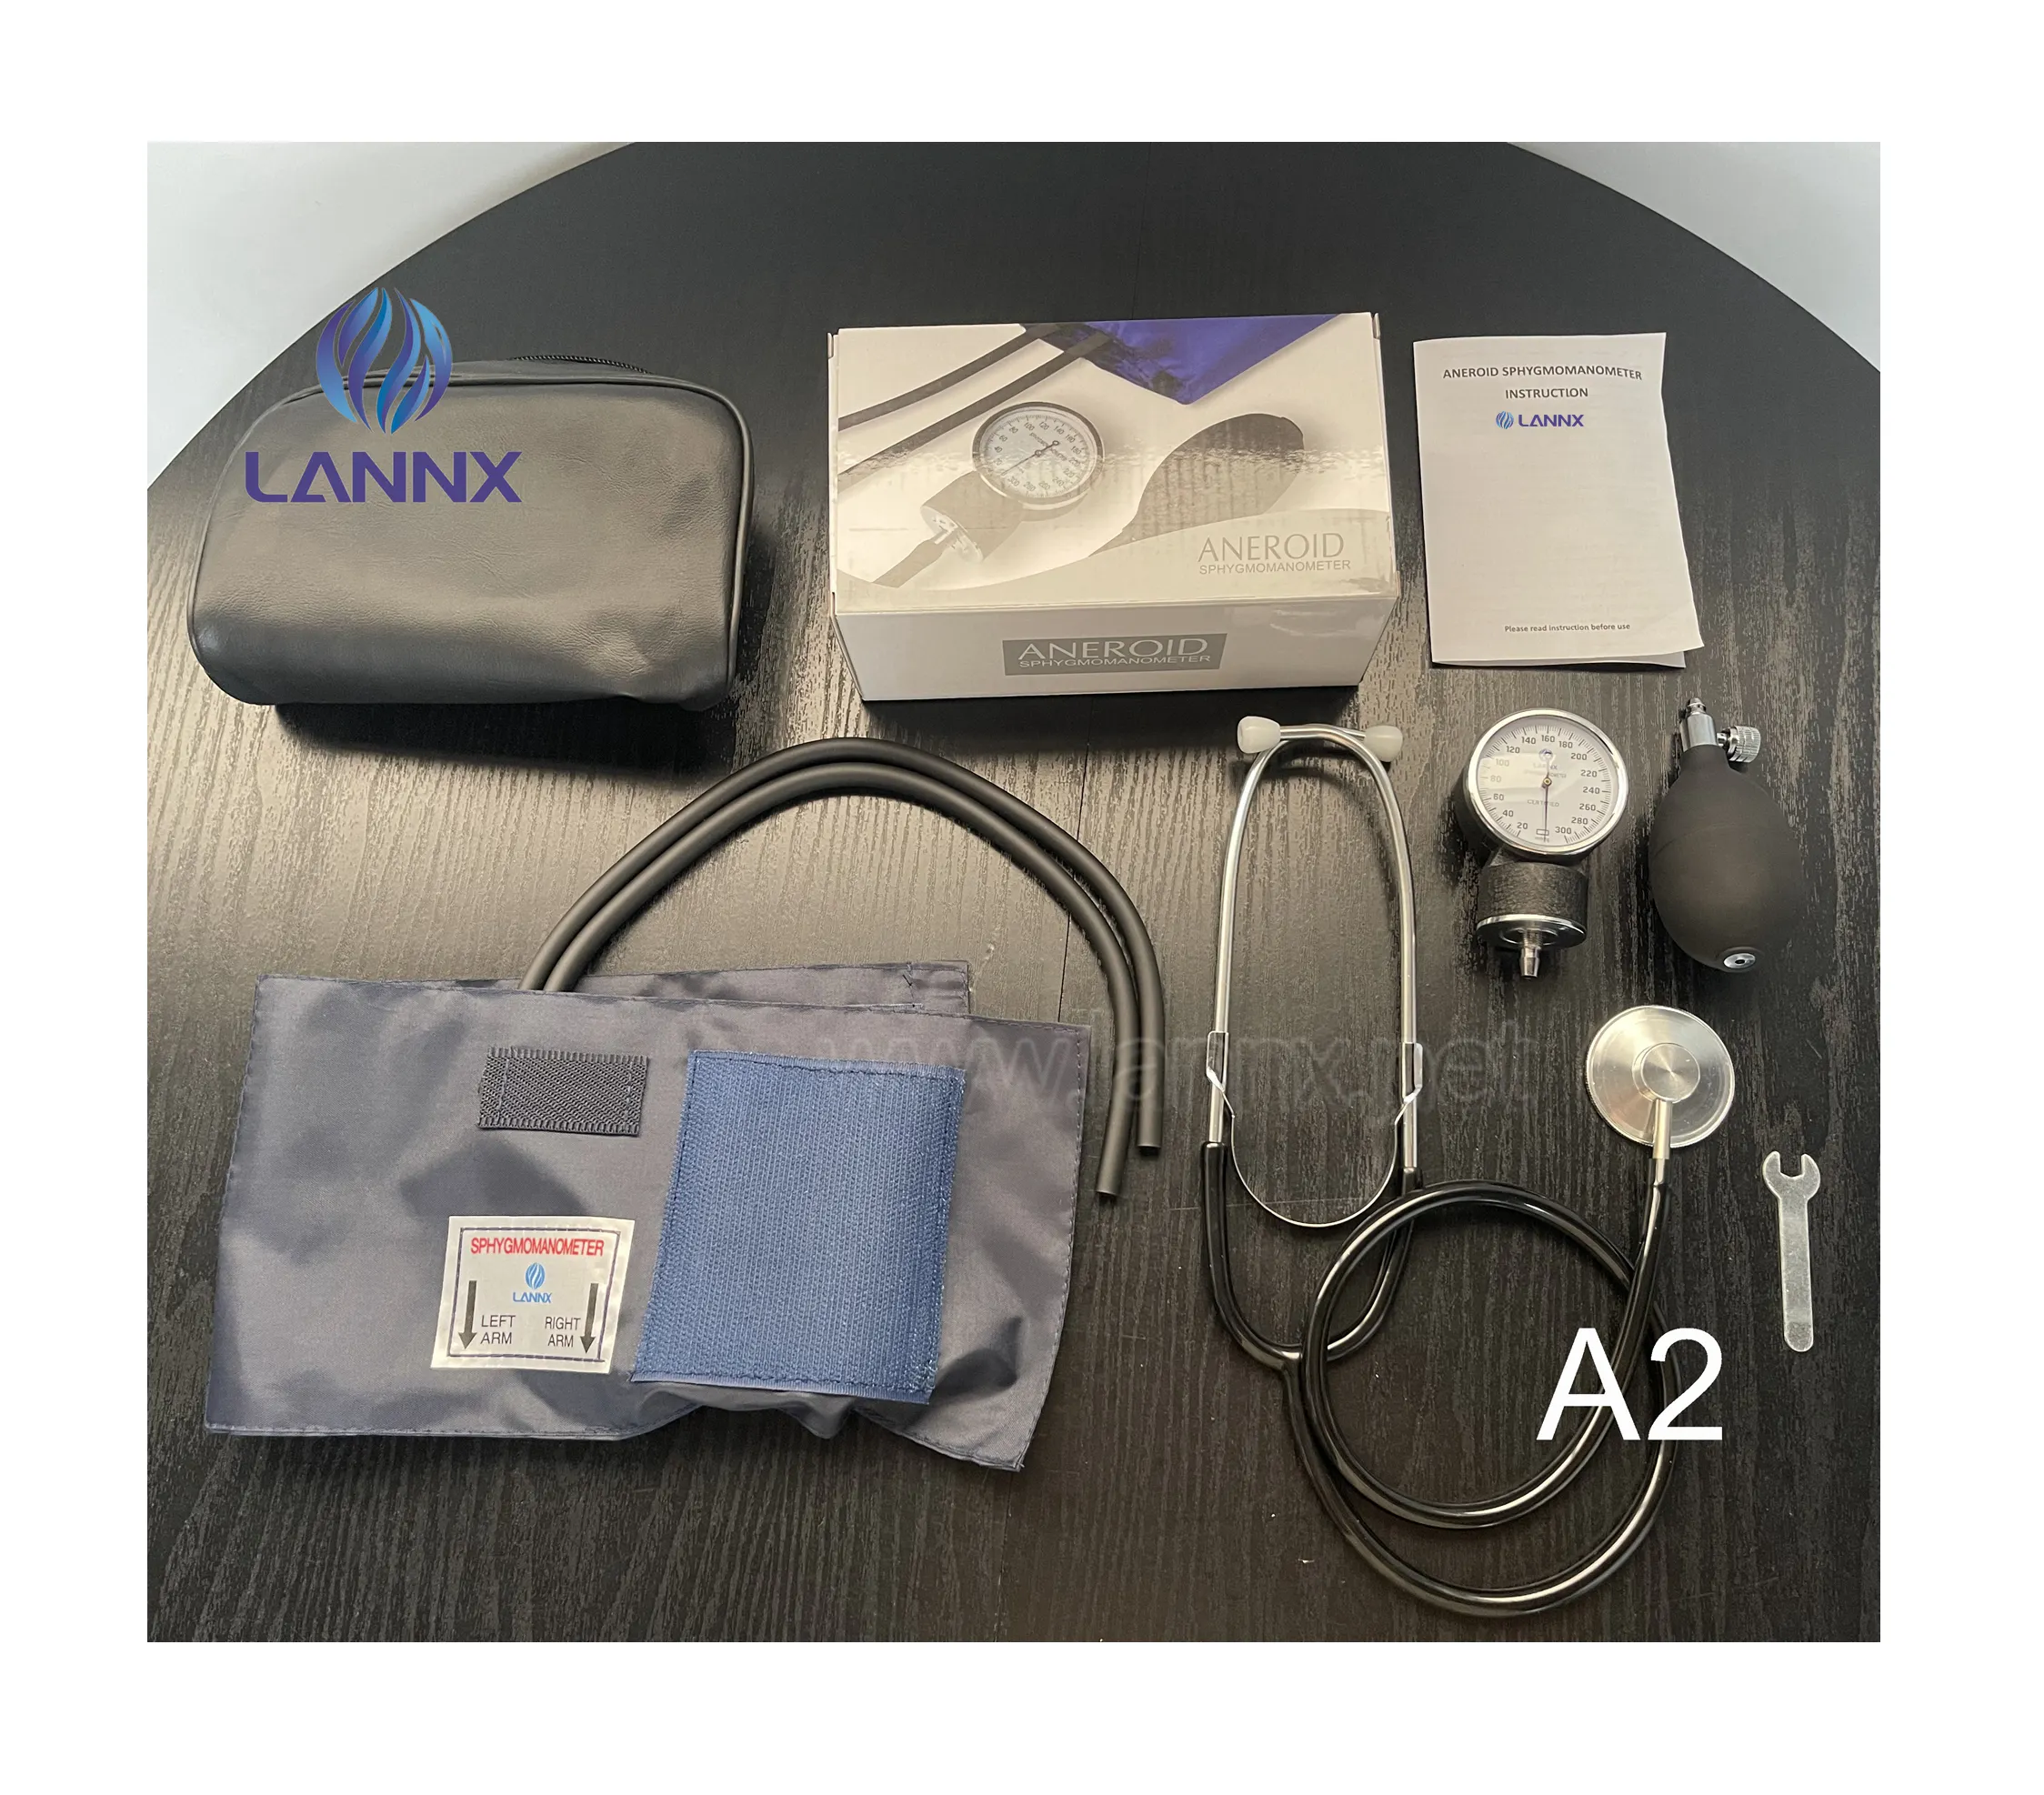 LANNX A2 Household medical device aneroid sphygmomanometer manual and stethoscope Upper Arm blood pressure monitor